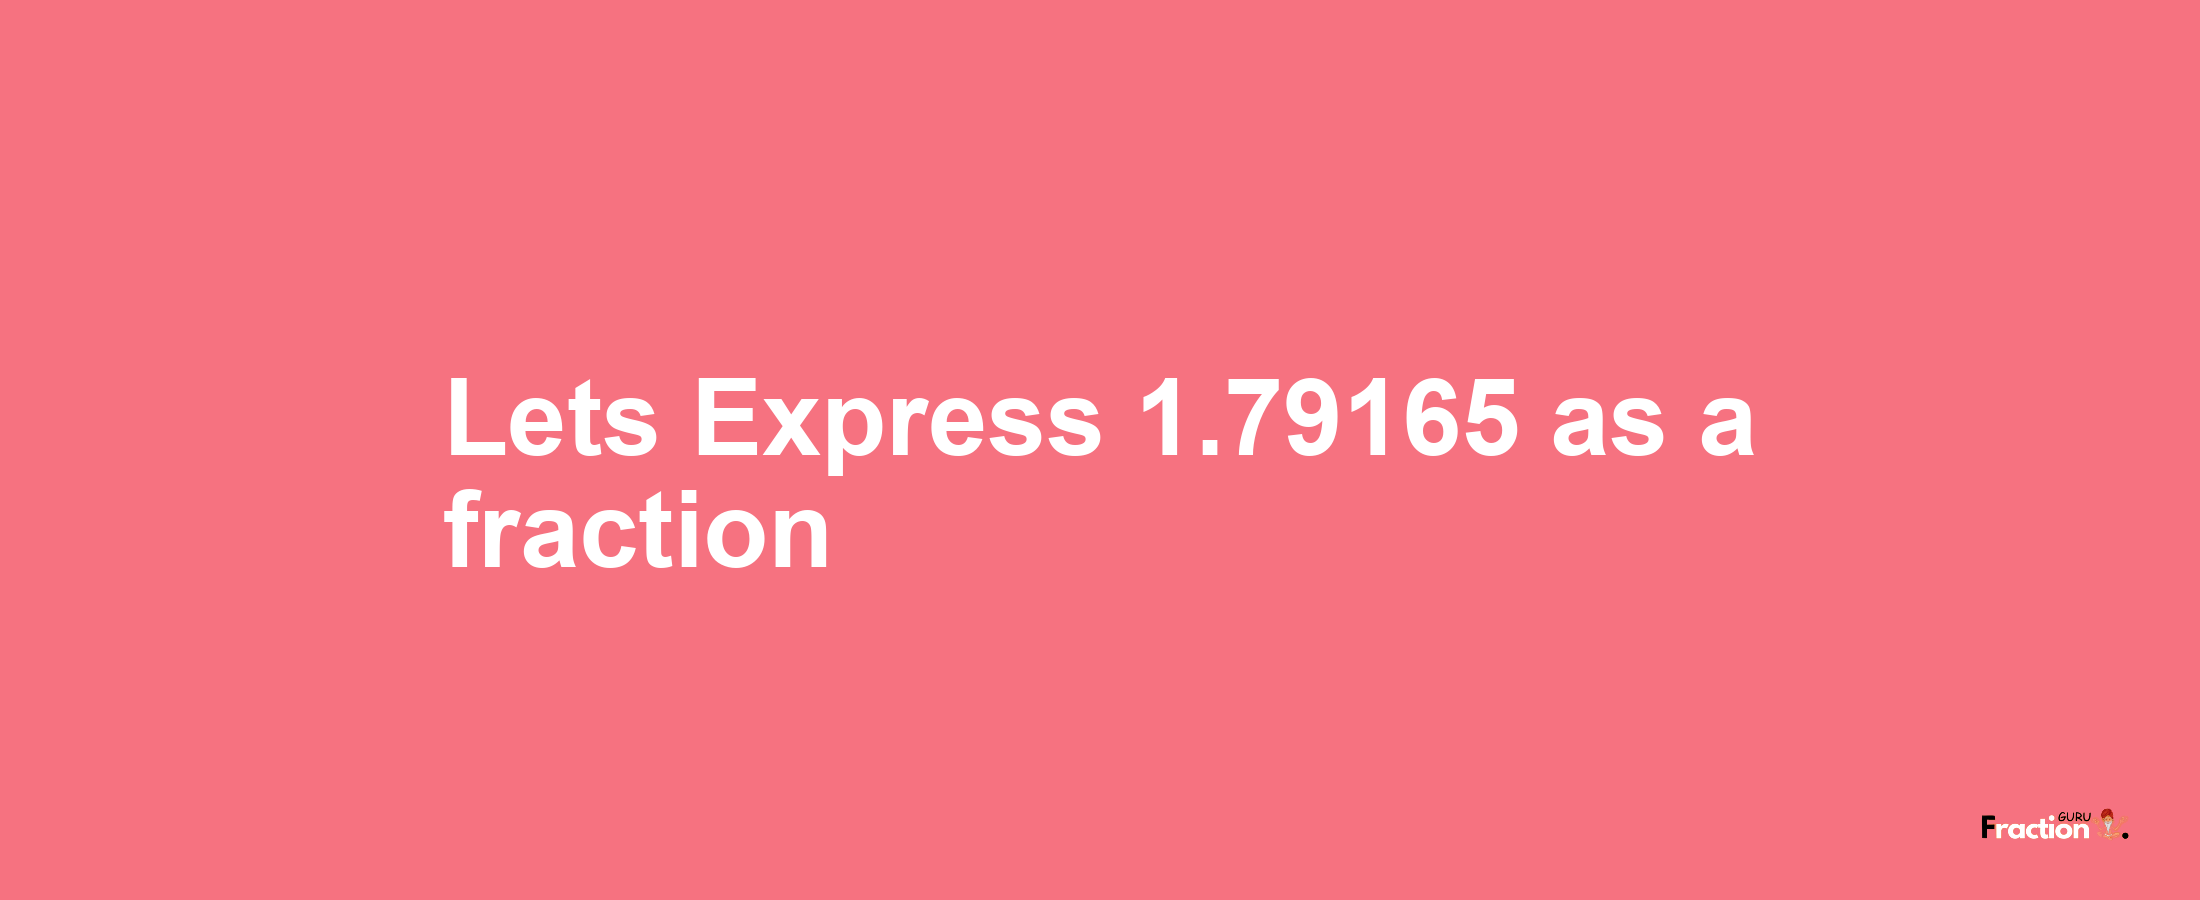 Lets Express 1.79165 as afraction